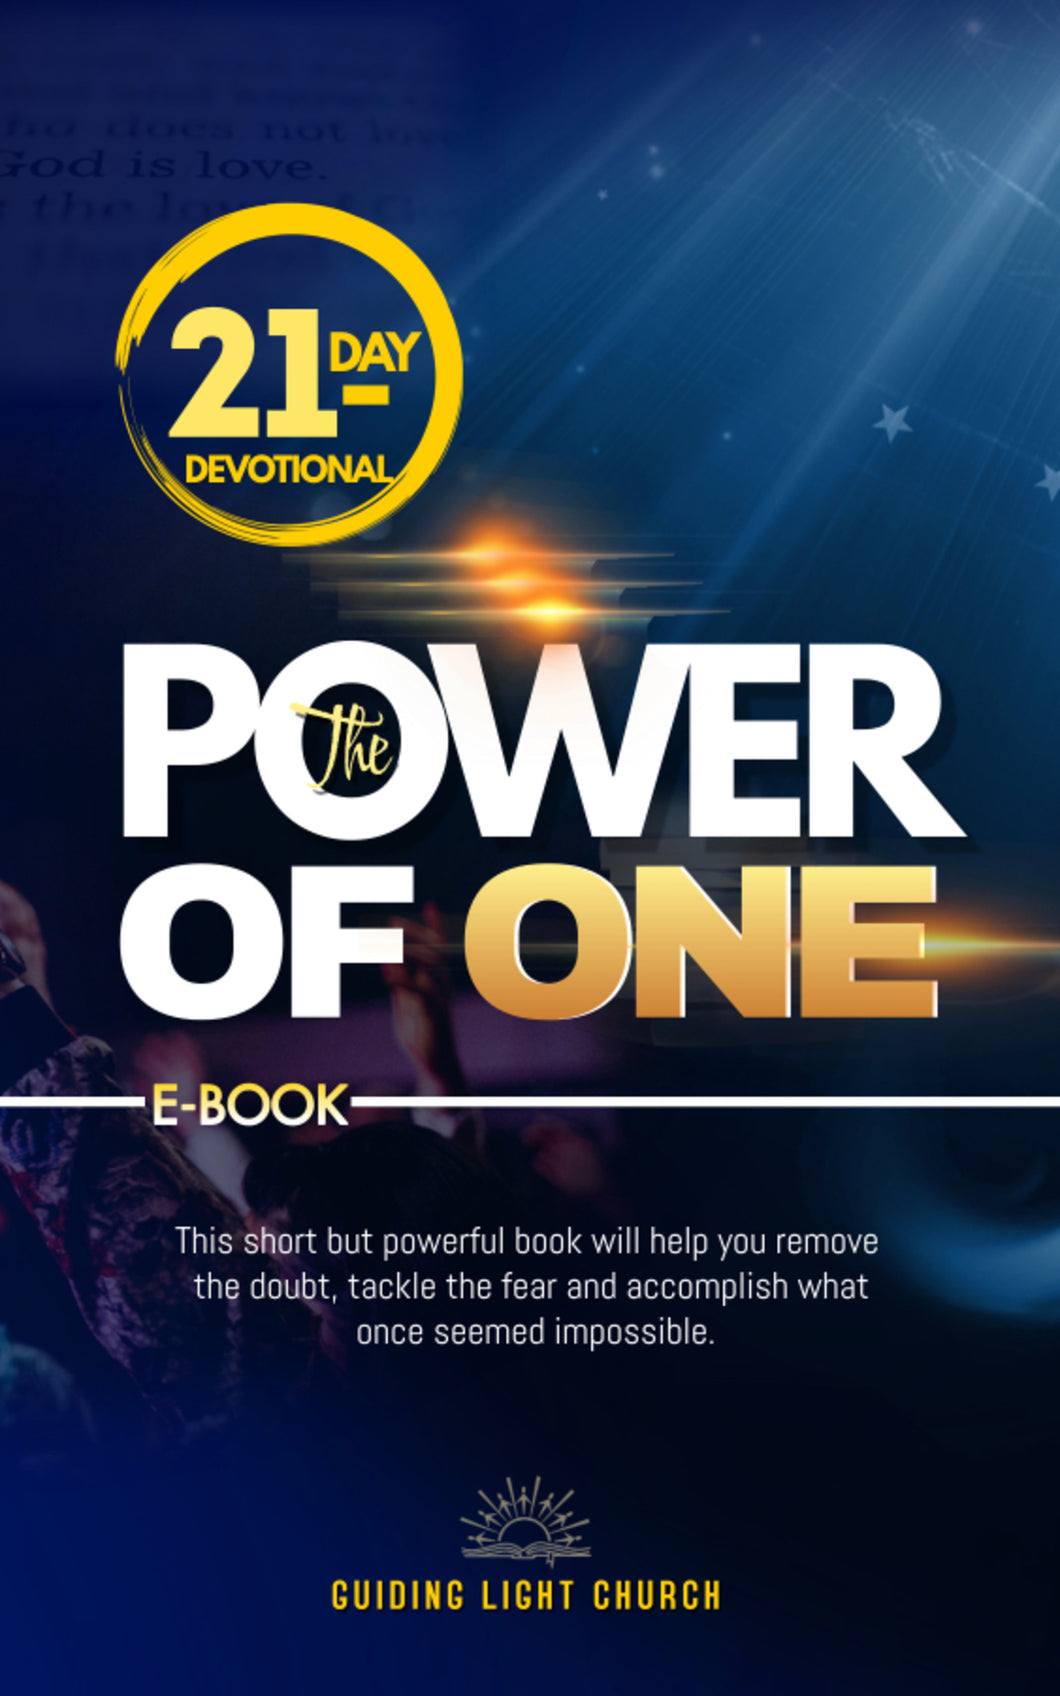 The Power of One - 21 Day Devotional (E-book)